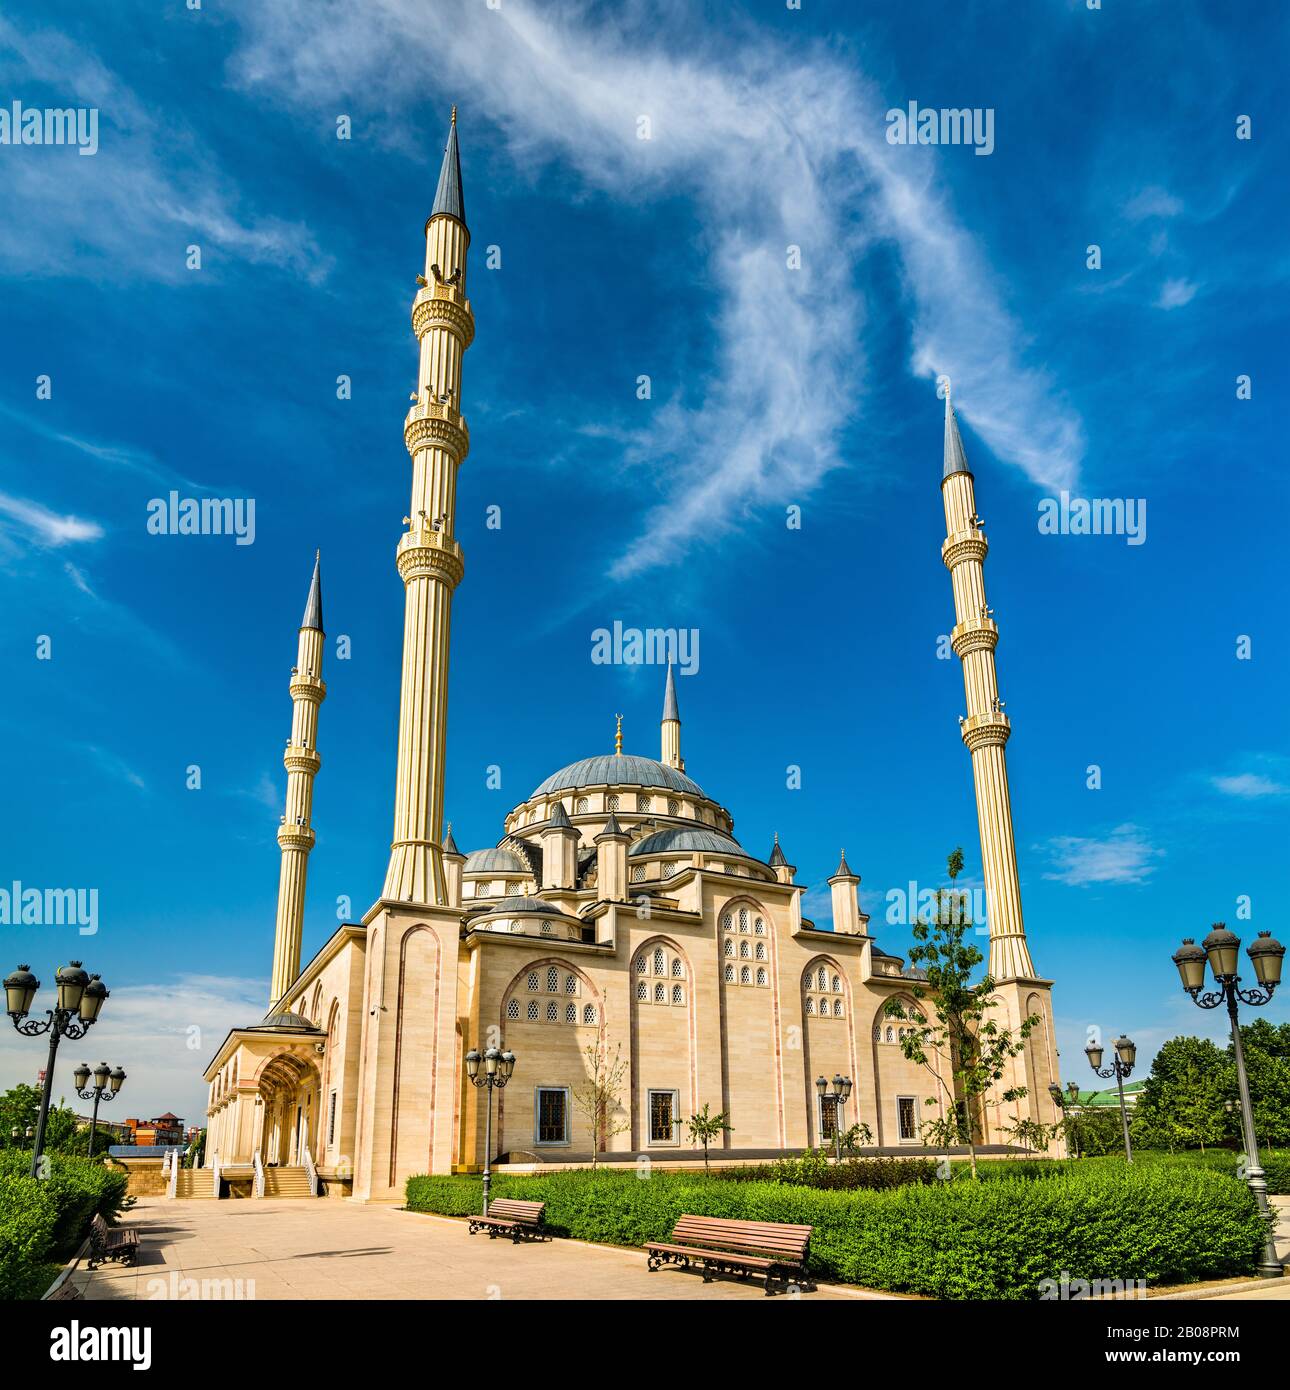 The Heart of Chechnya Mosque in Grozny, Russia Stock Photo